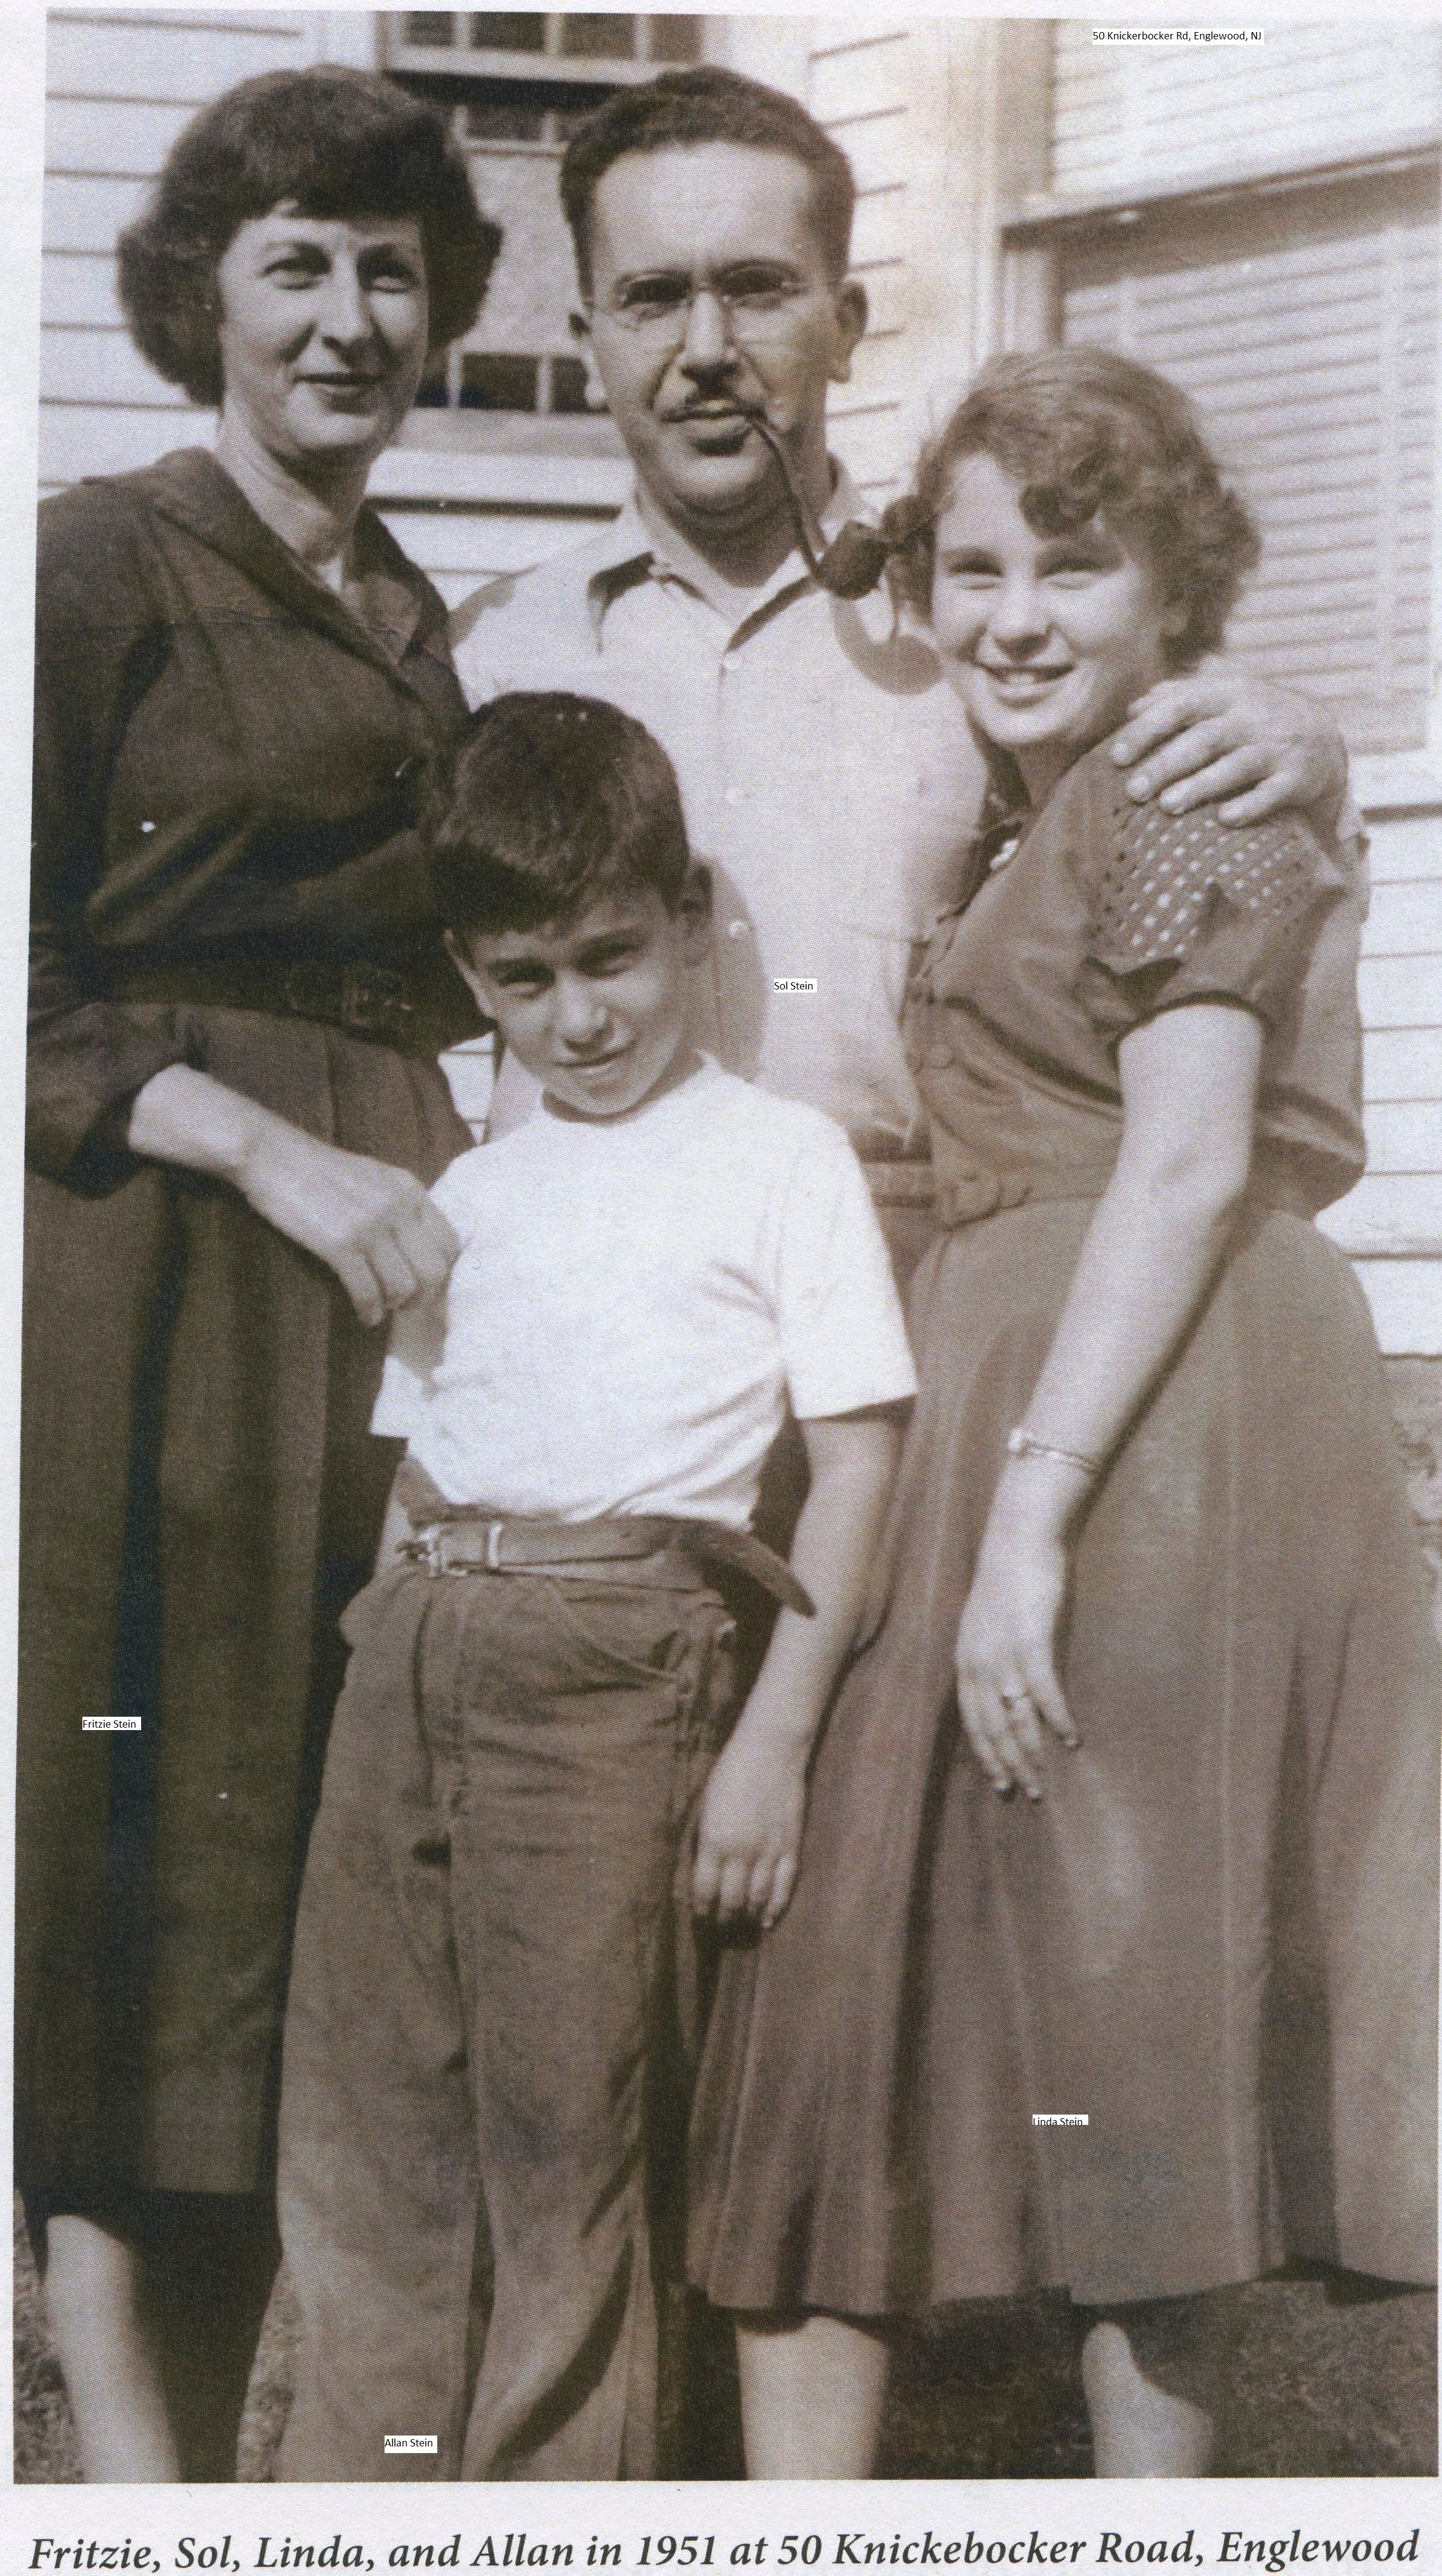 Fritzie and family Englewood, NJ